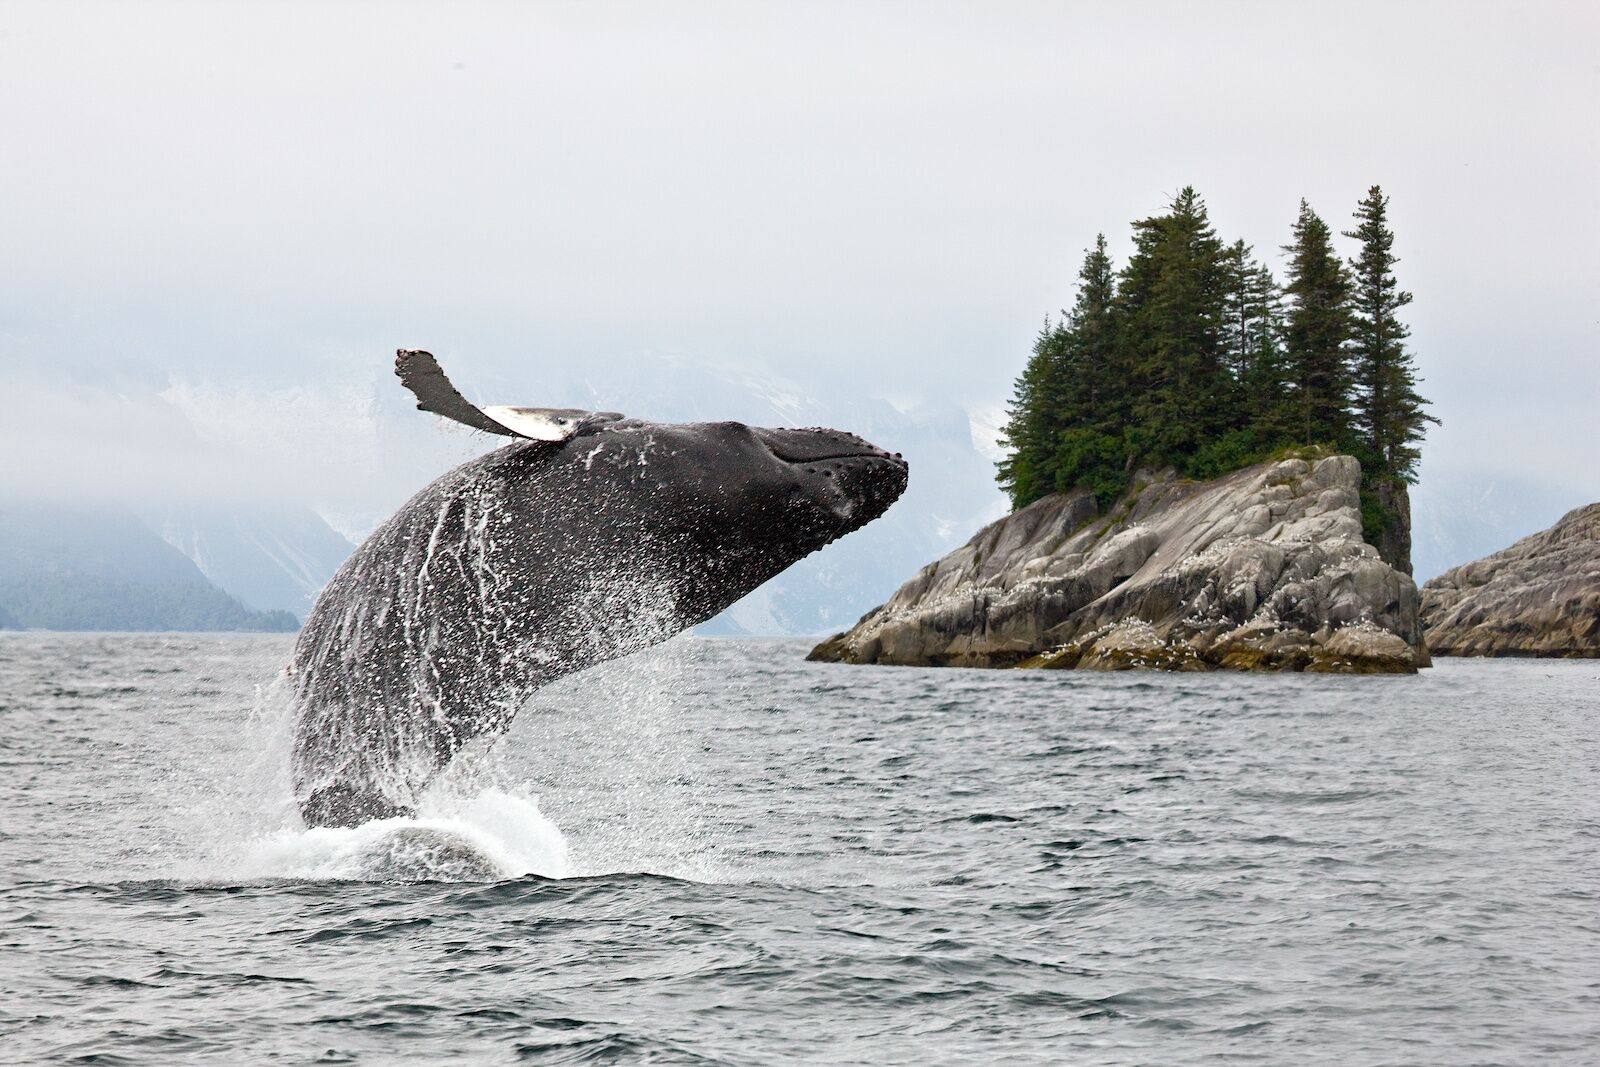 Whale breach - something to see if you stay at stillpoint lodge in the summer in alaska